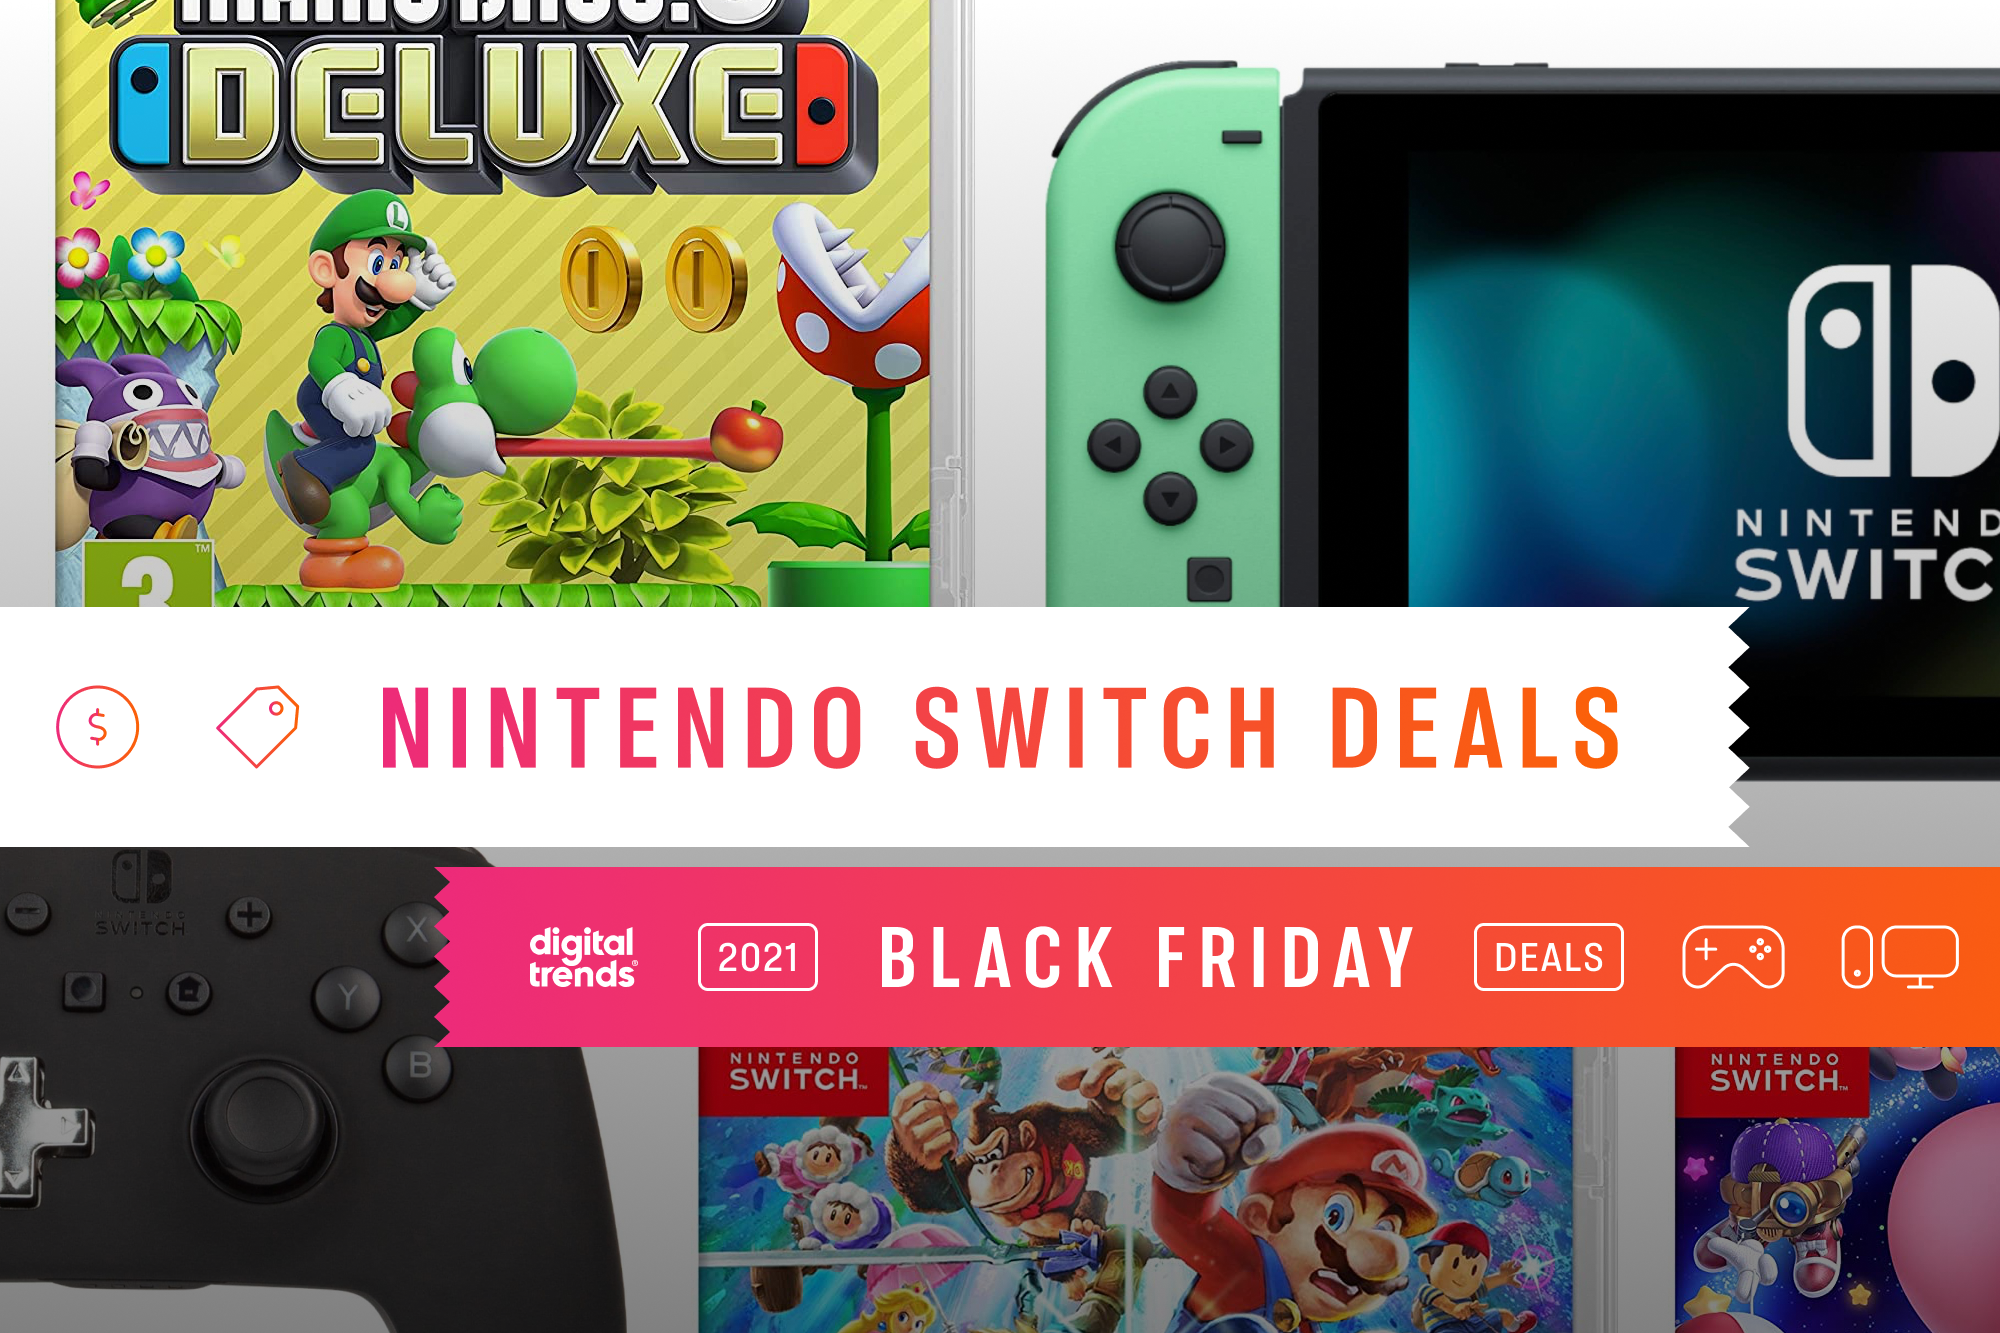 Black Friday: Nintendo Switch bundle with 'Mario Kart' rolling out